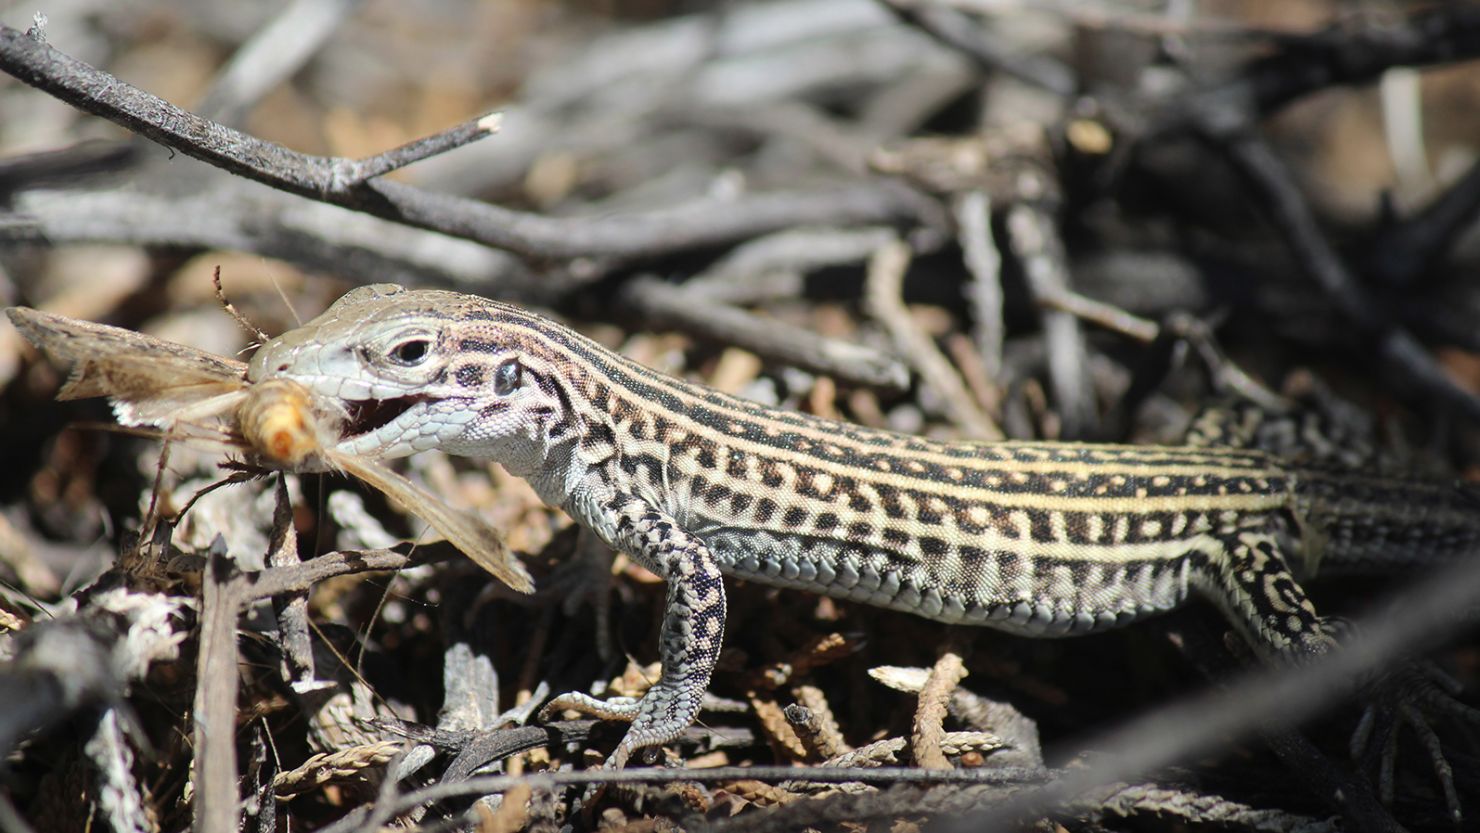 Blood samples from these lizards revealed elevated stress levels from the noise. 
